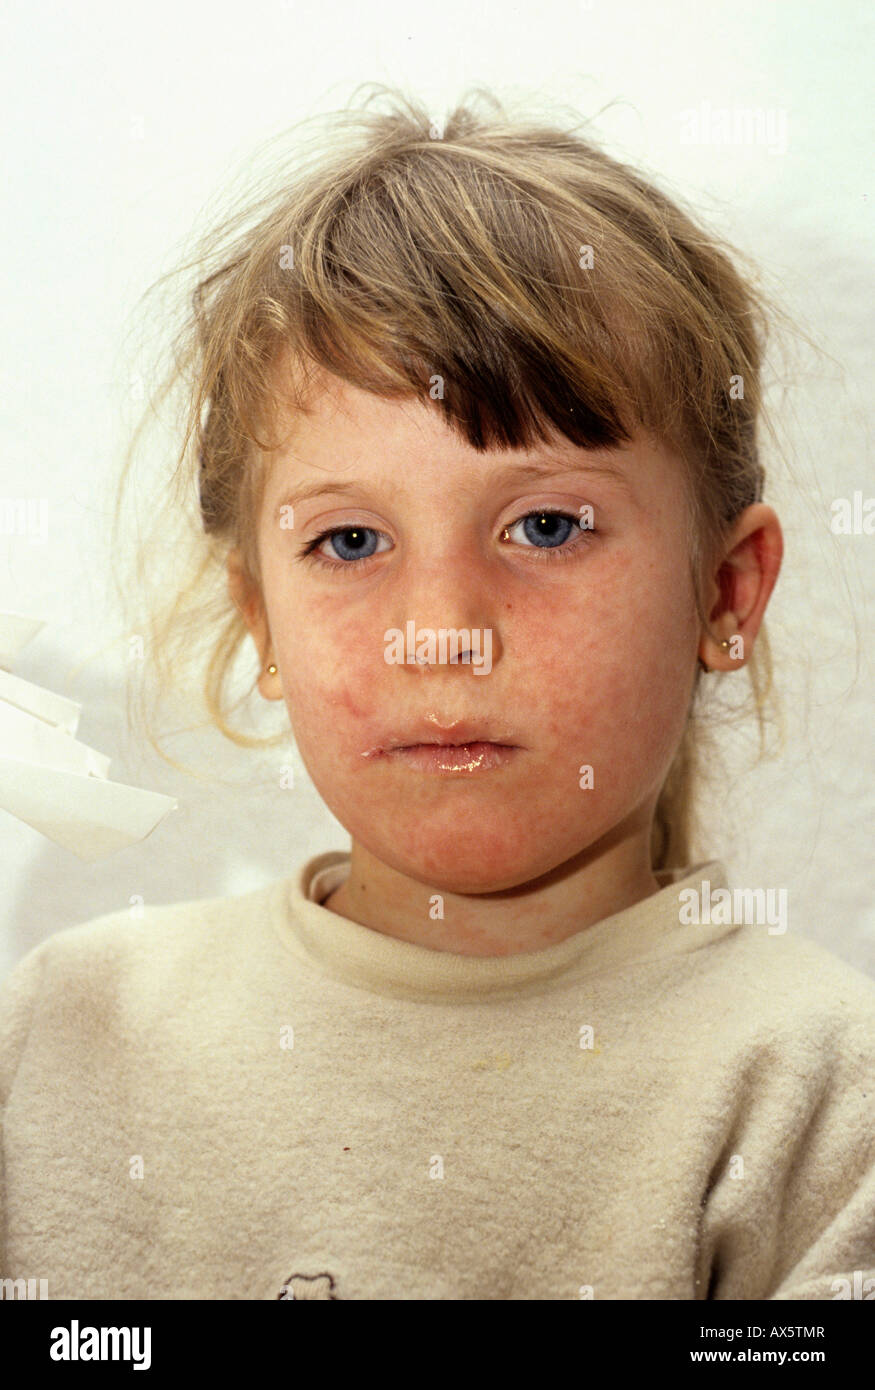 Girl suffering from measles (rubeola) Stock Photo